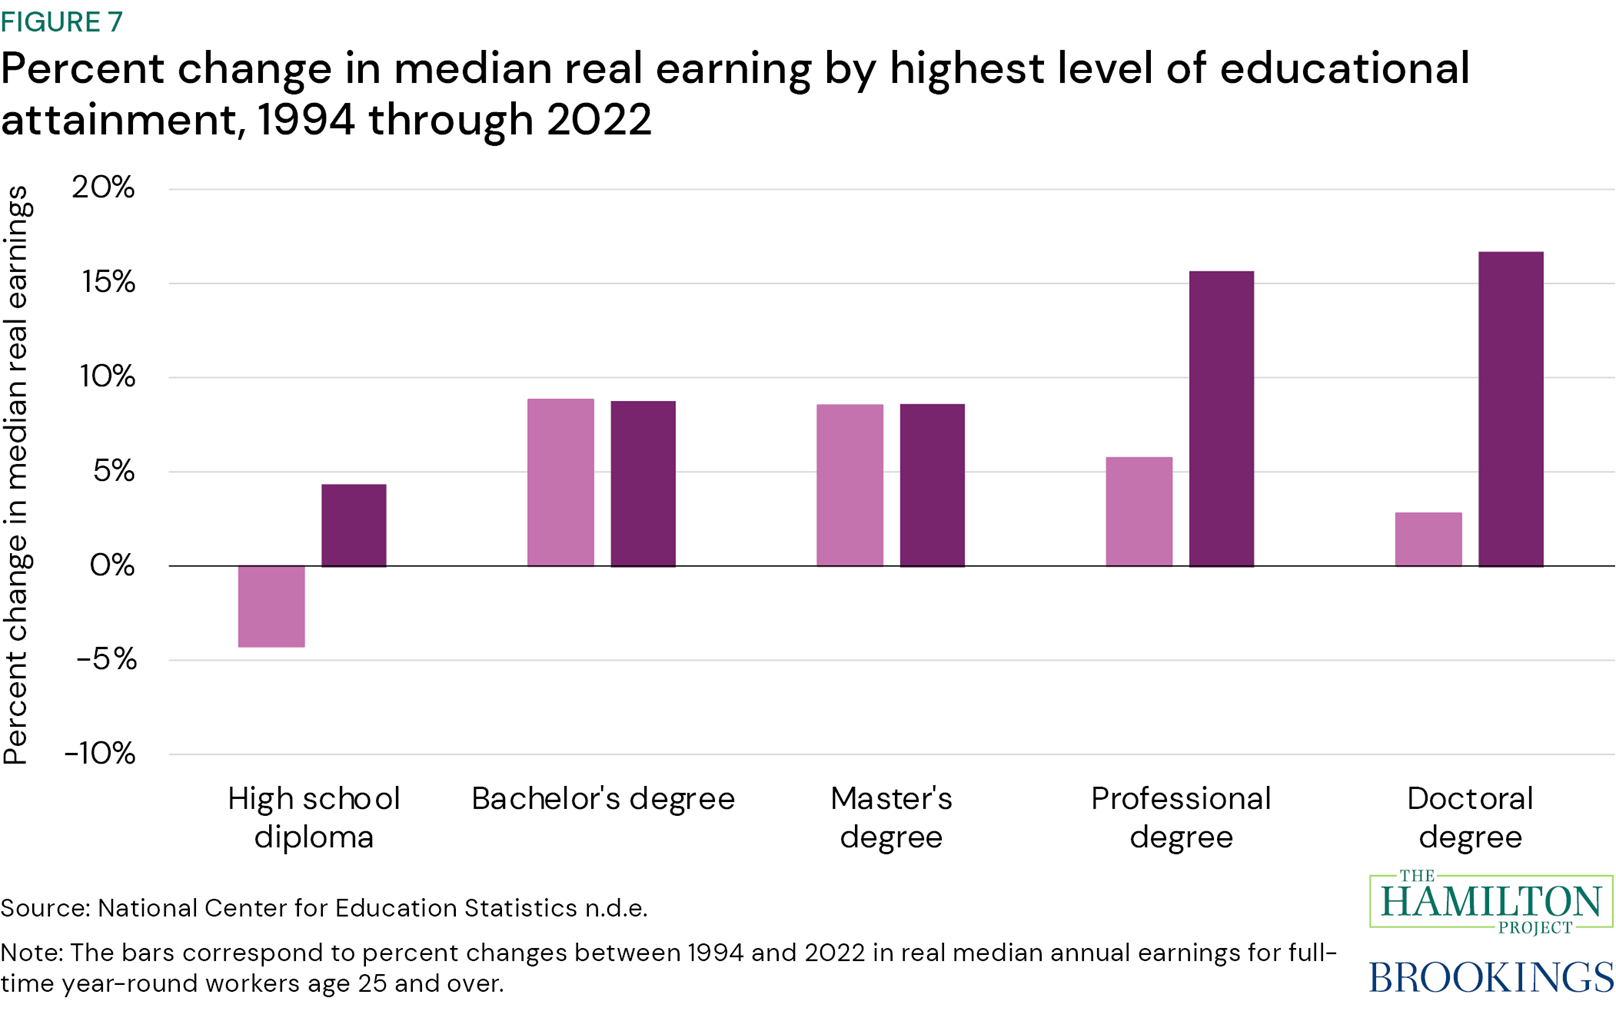 Figure 7: Percent change in median real earnings by highest level of educational attainment, 1994 through 2022